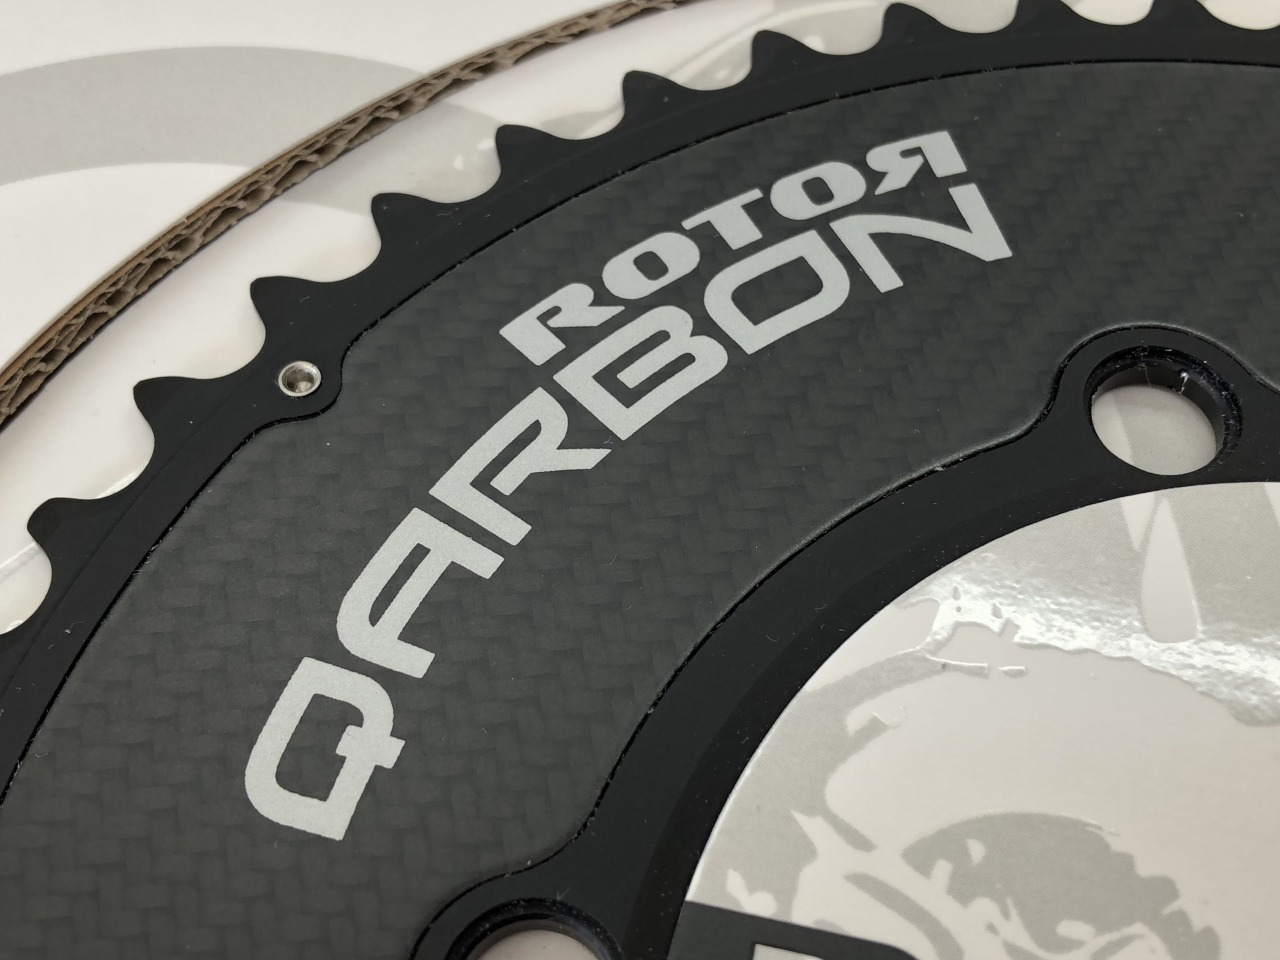 ROTOR カーボンチェーンリング取り付け！ - Climb cycle sports